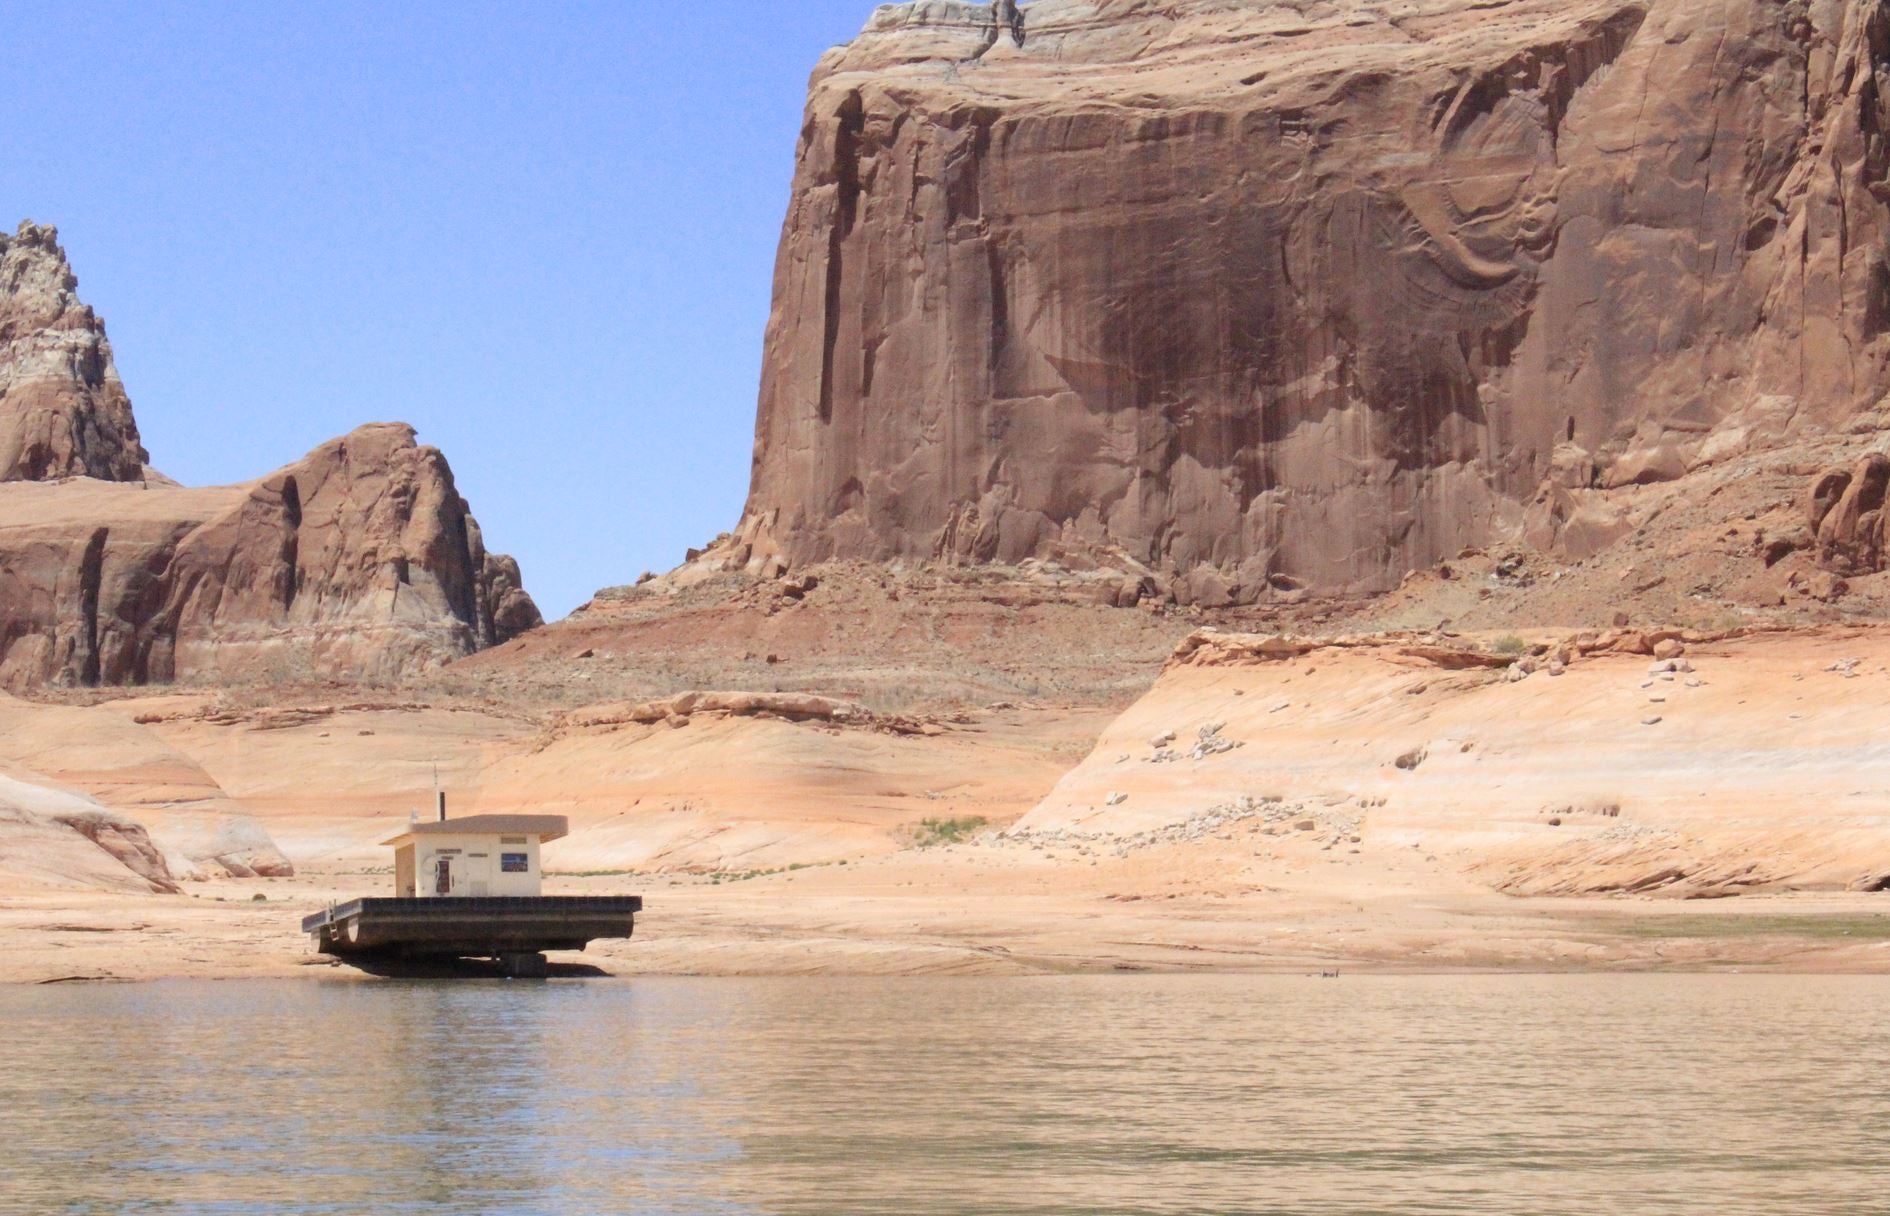 Midwest Mecca for Boating & Fishing - Lake Powell - But for How Long?